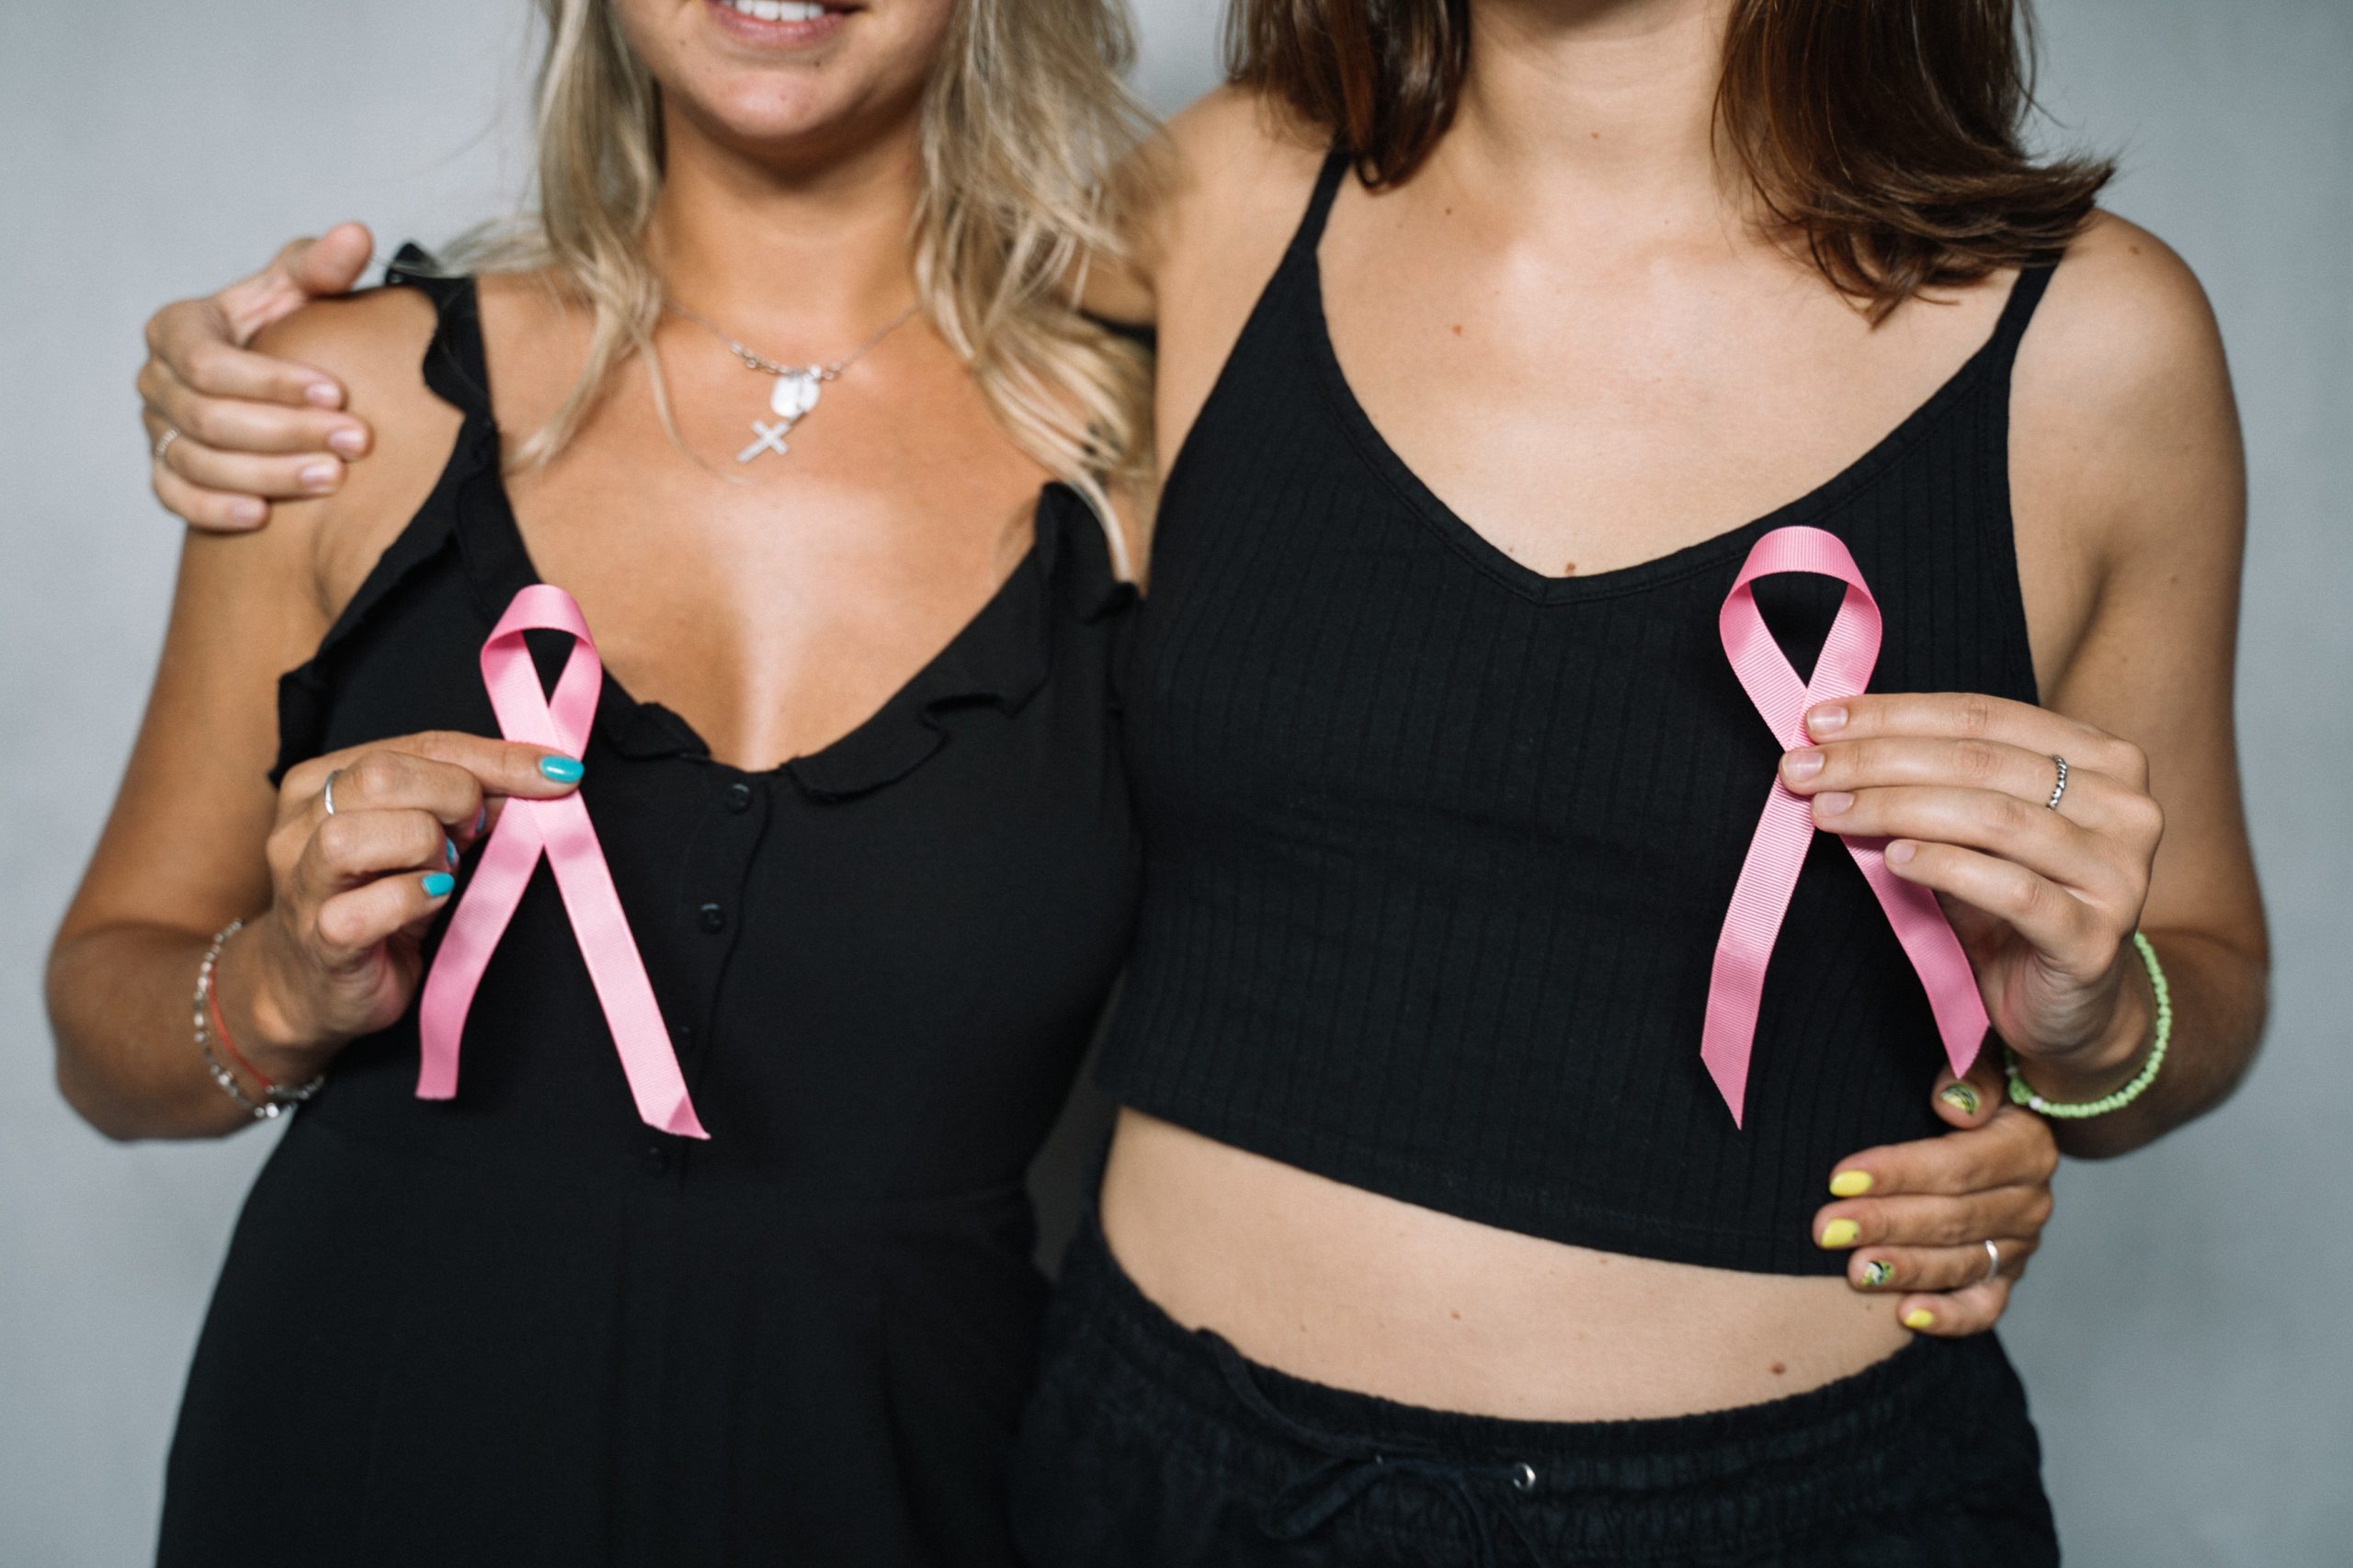 two women holding pink ribbons showing their support of breast cancer screenings